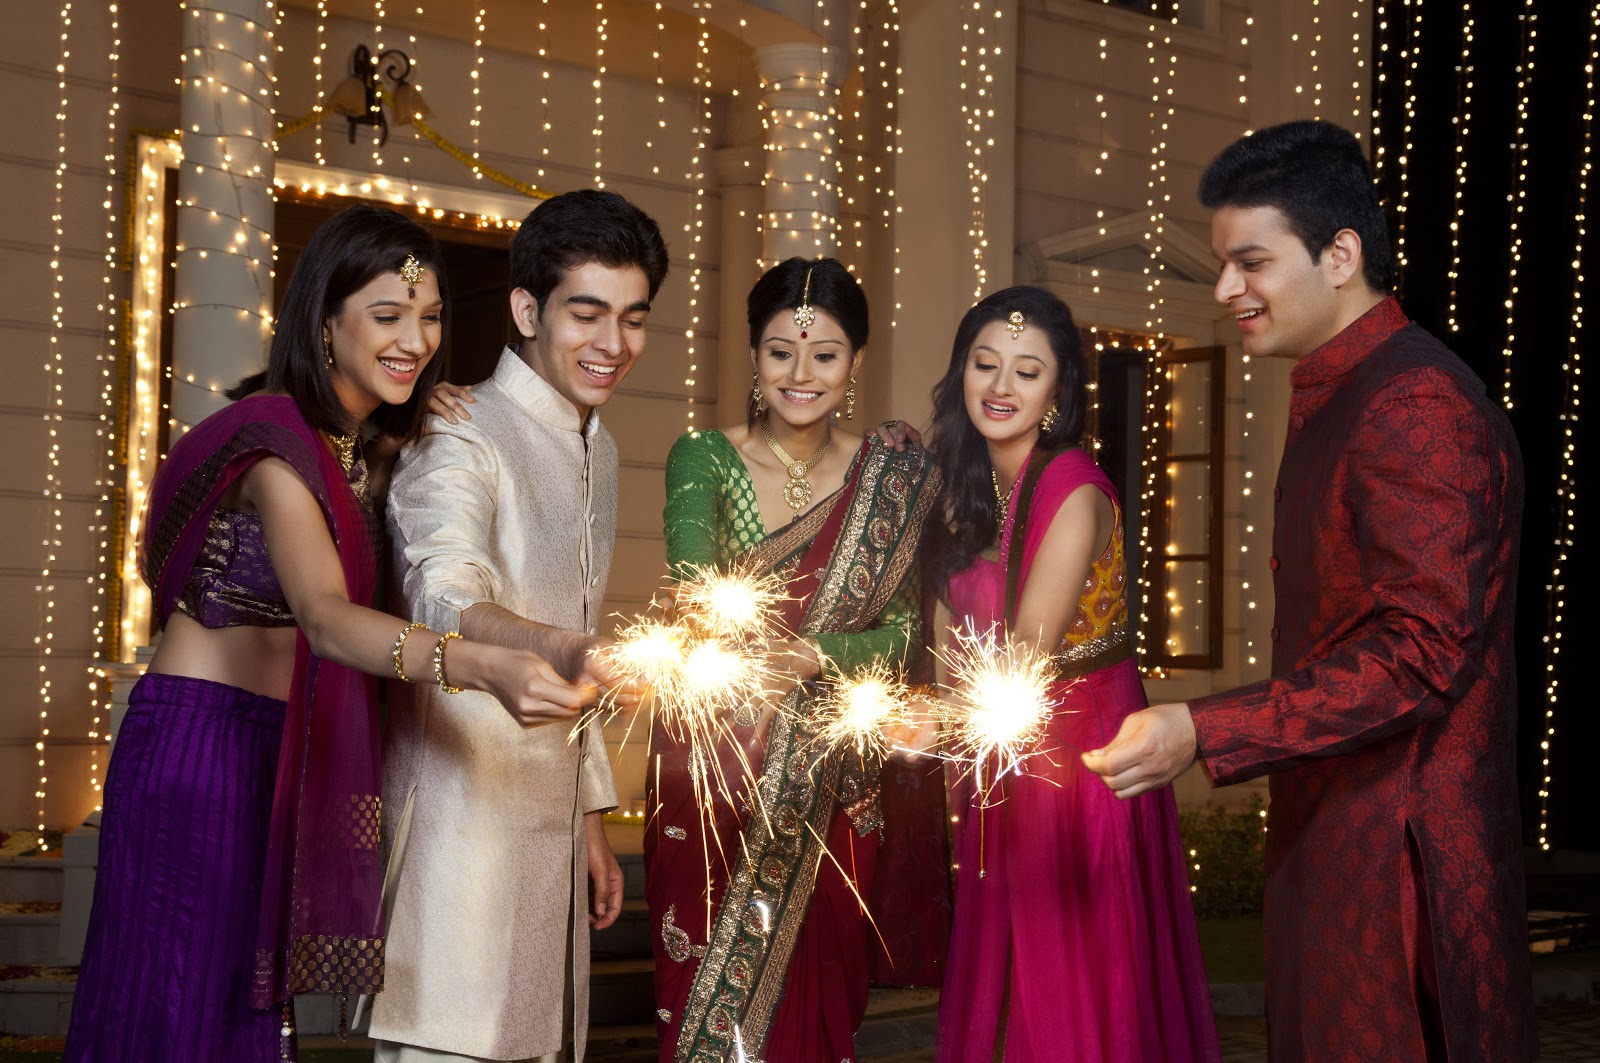 Diwali party ideas: A group of guests in traditional saris, hold sparklers